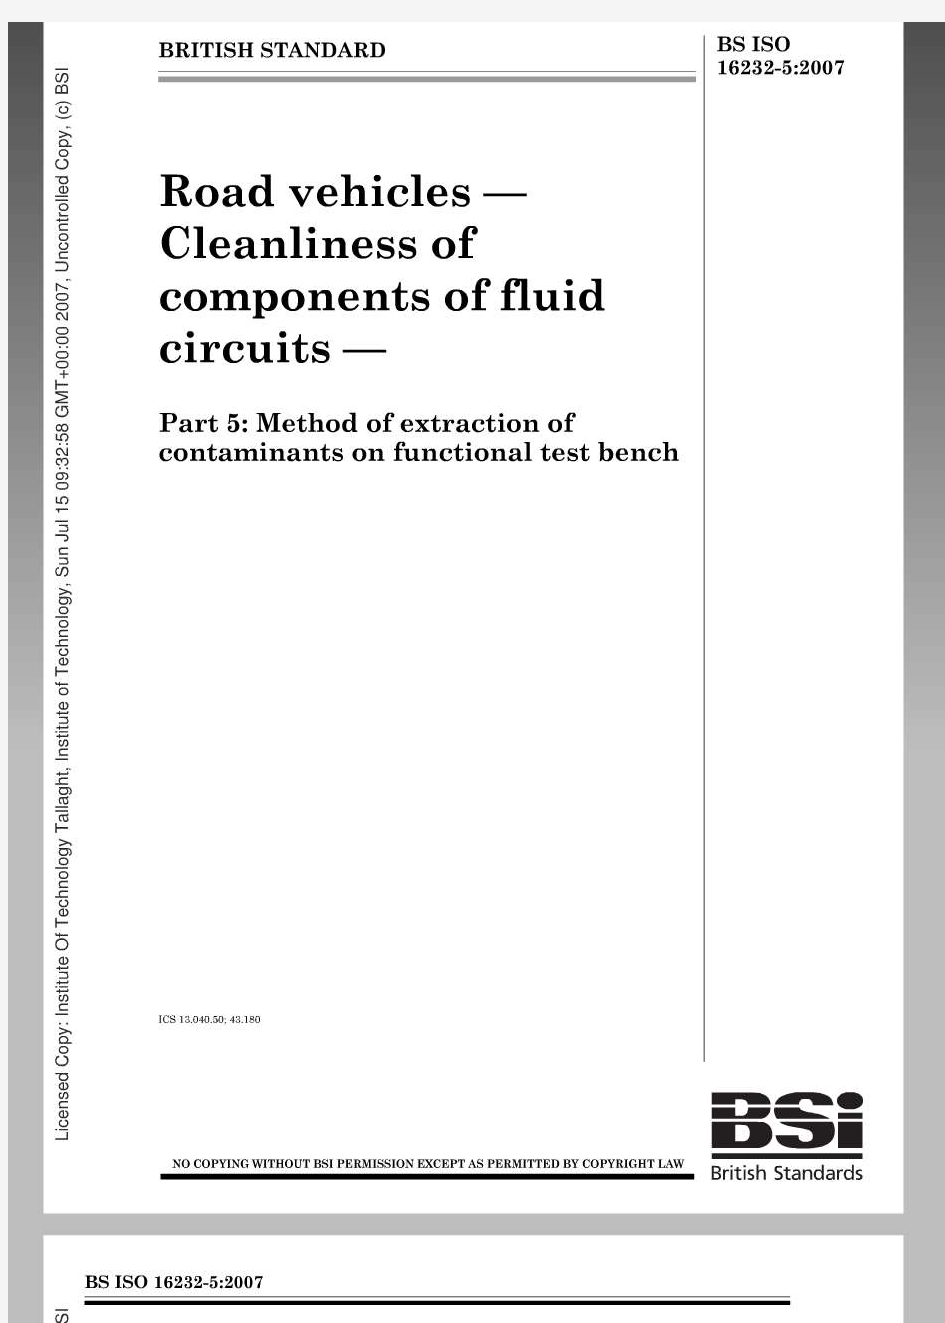 BS ISO 16232-5-2007 Road vehicles -Cleanliness of components of fluid circuits-P.